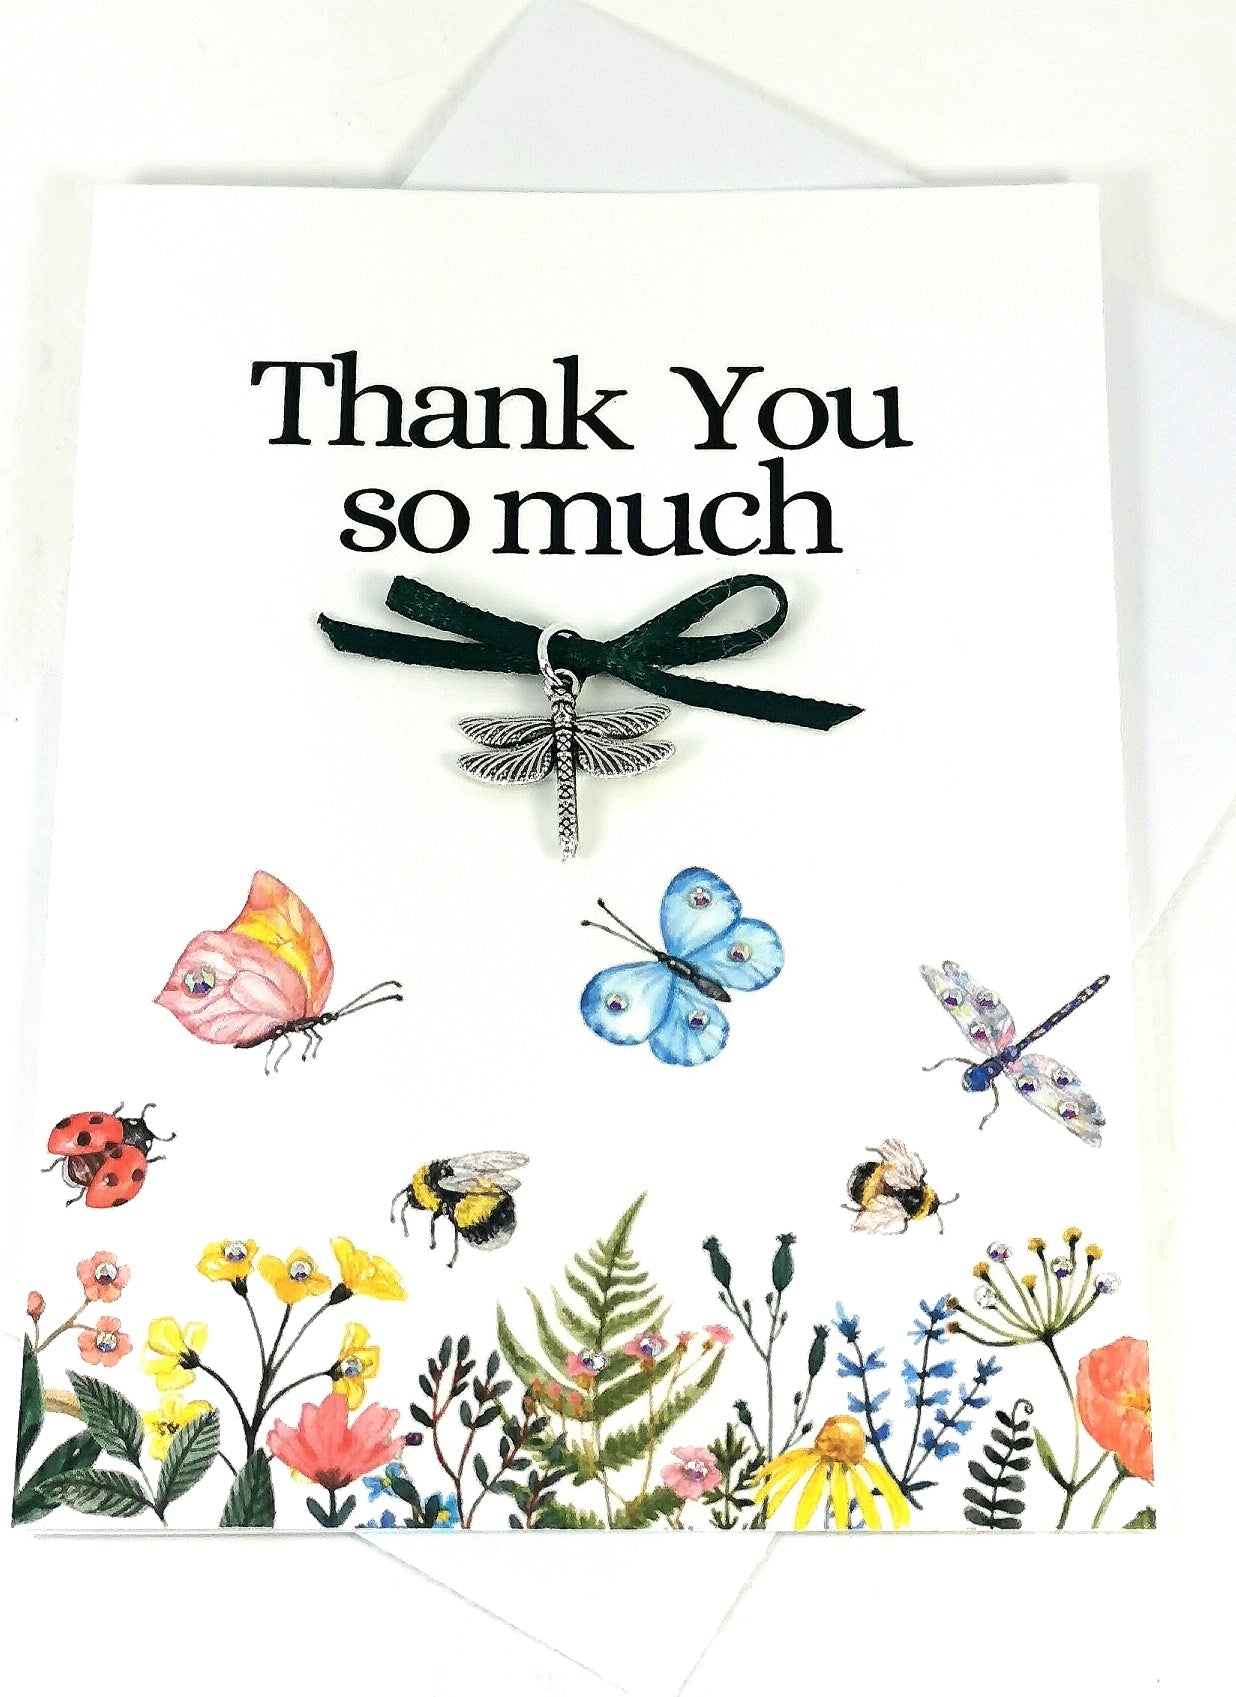 Thank You Charm Card |   Thank You so Much Embellished Dragonfly charm card